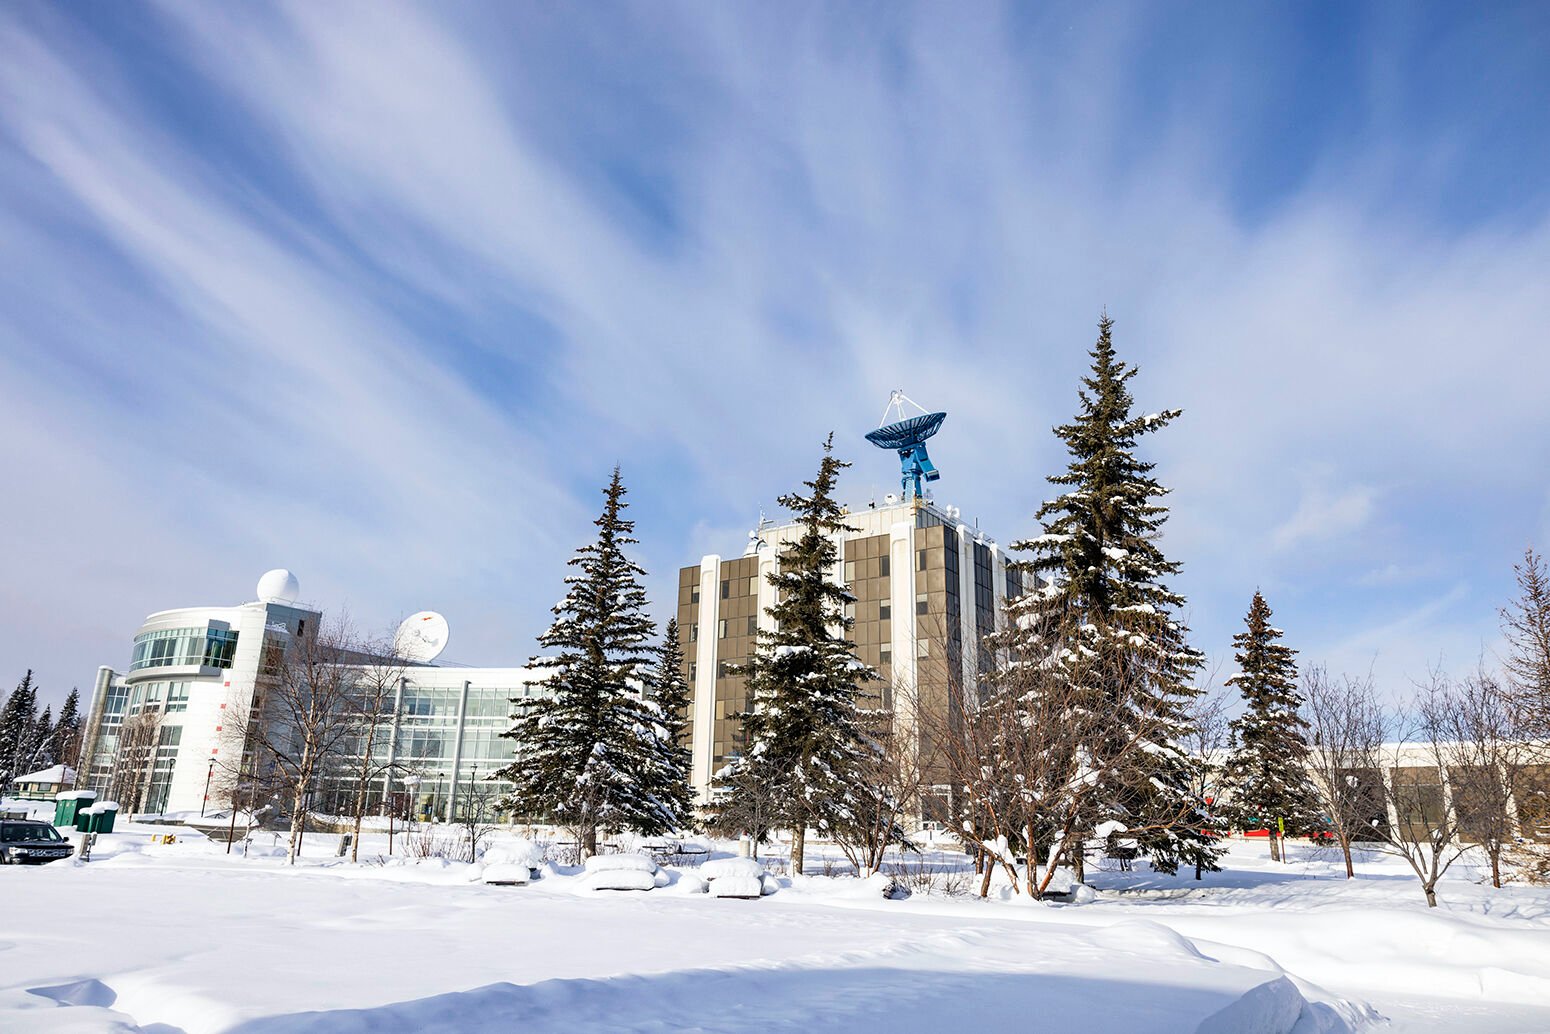 The Elvey Building, right, at the University of Alaska Fairbanks houses the Geophysical Detection of Nuclear Proliferation University Affiliated Research Center.